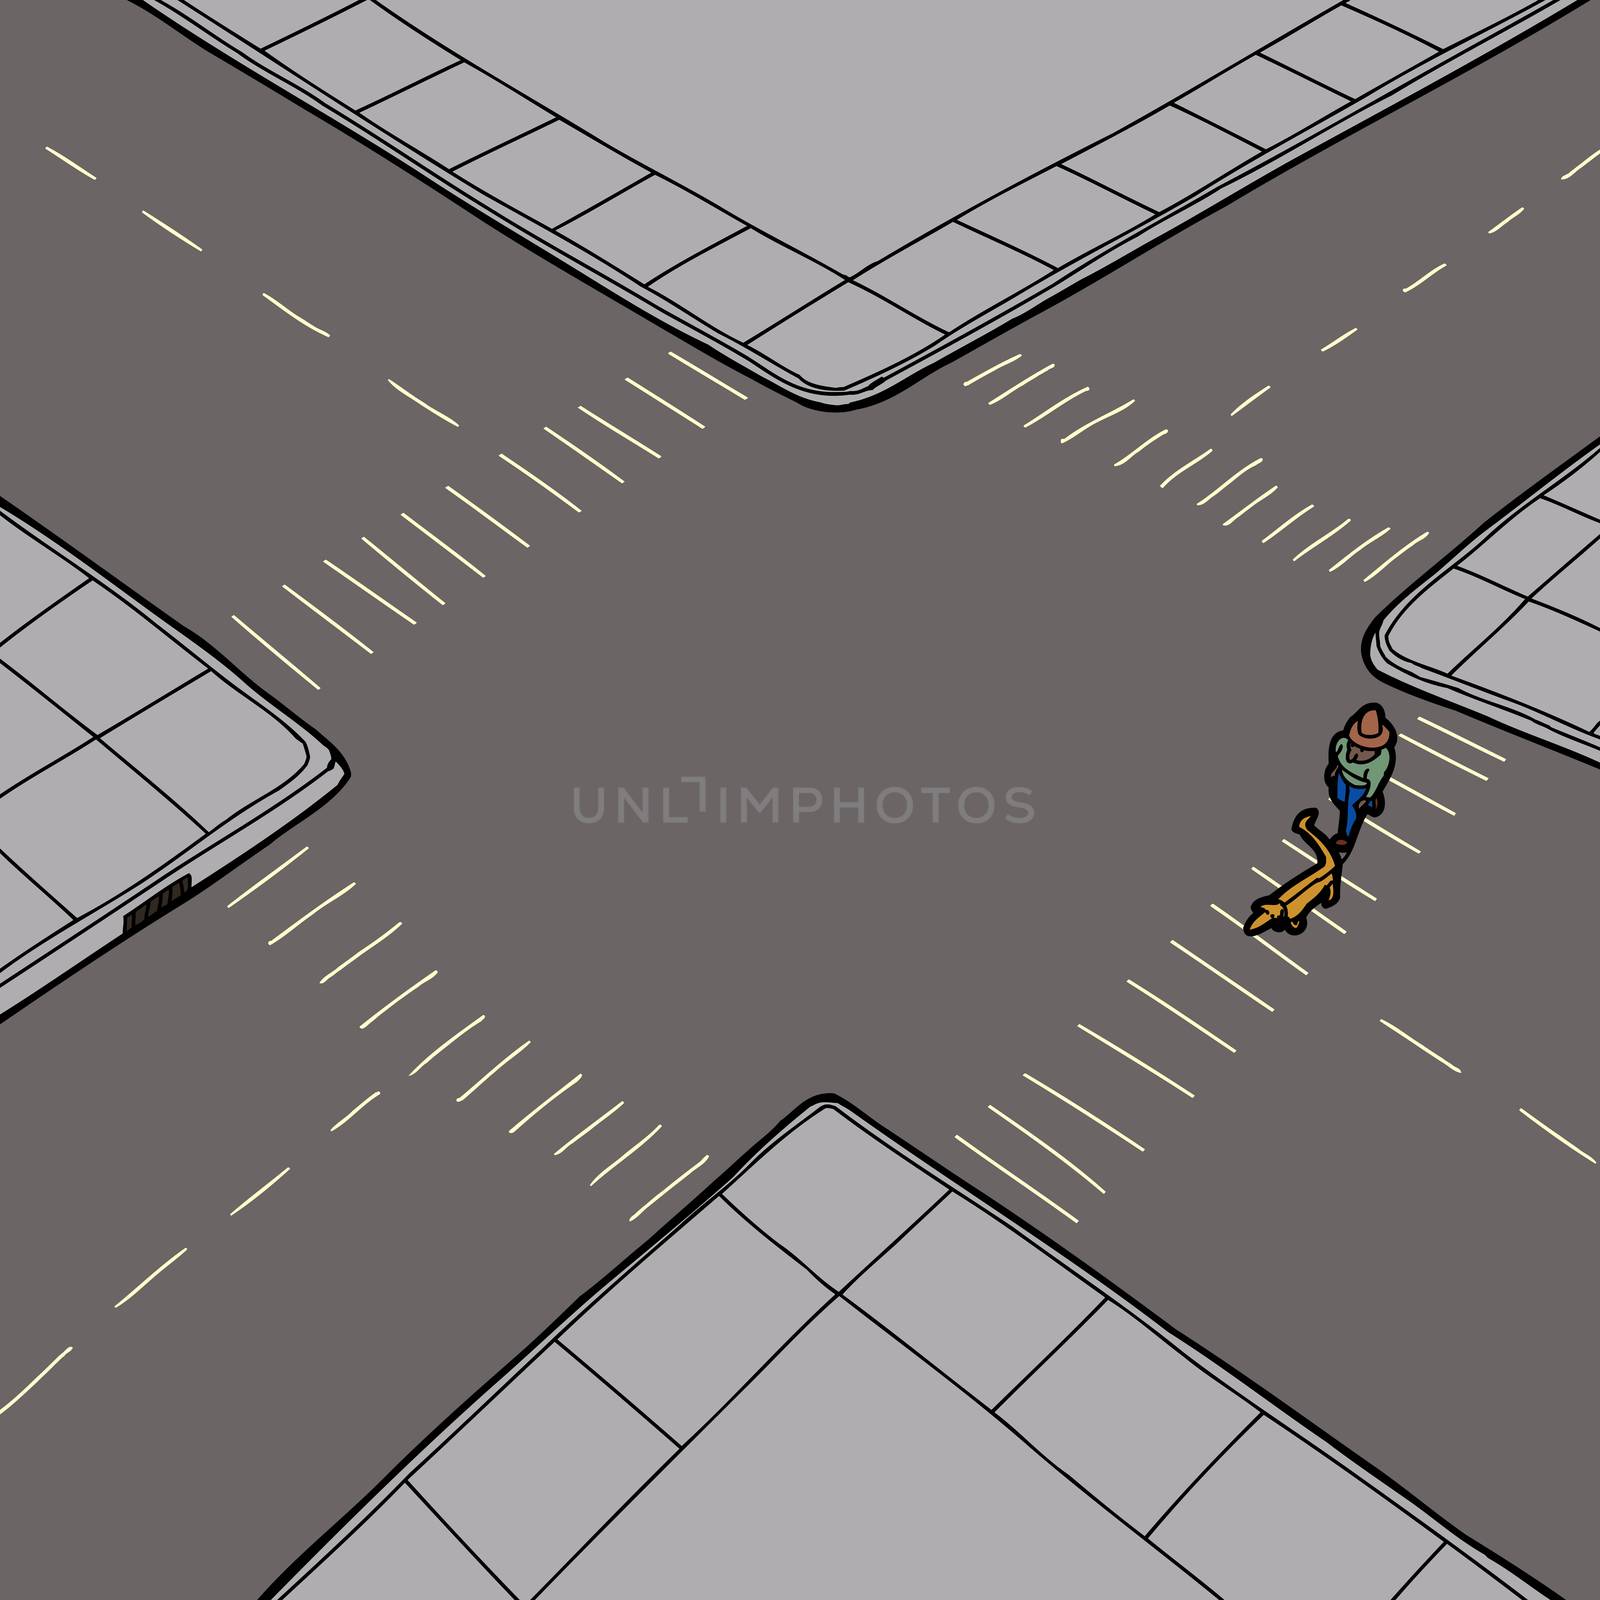 Pedestrian crossing street at intersection with pet